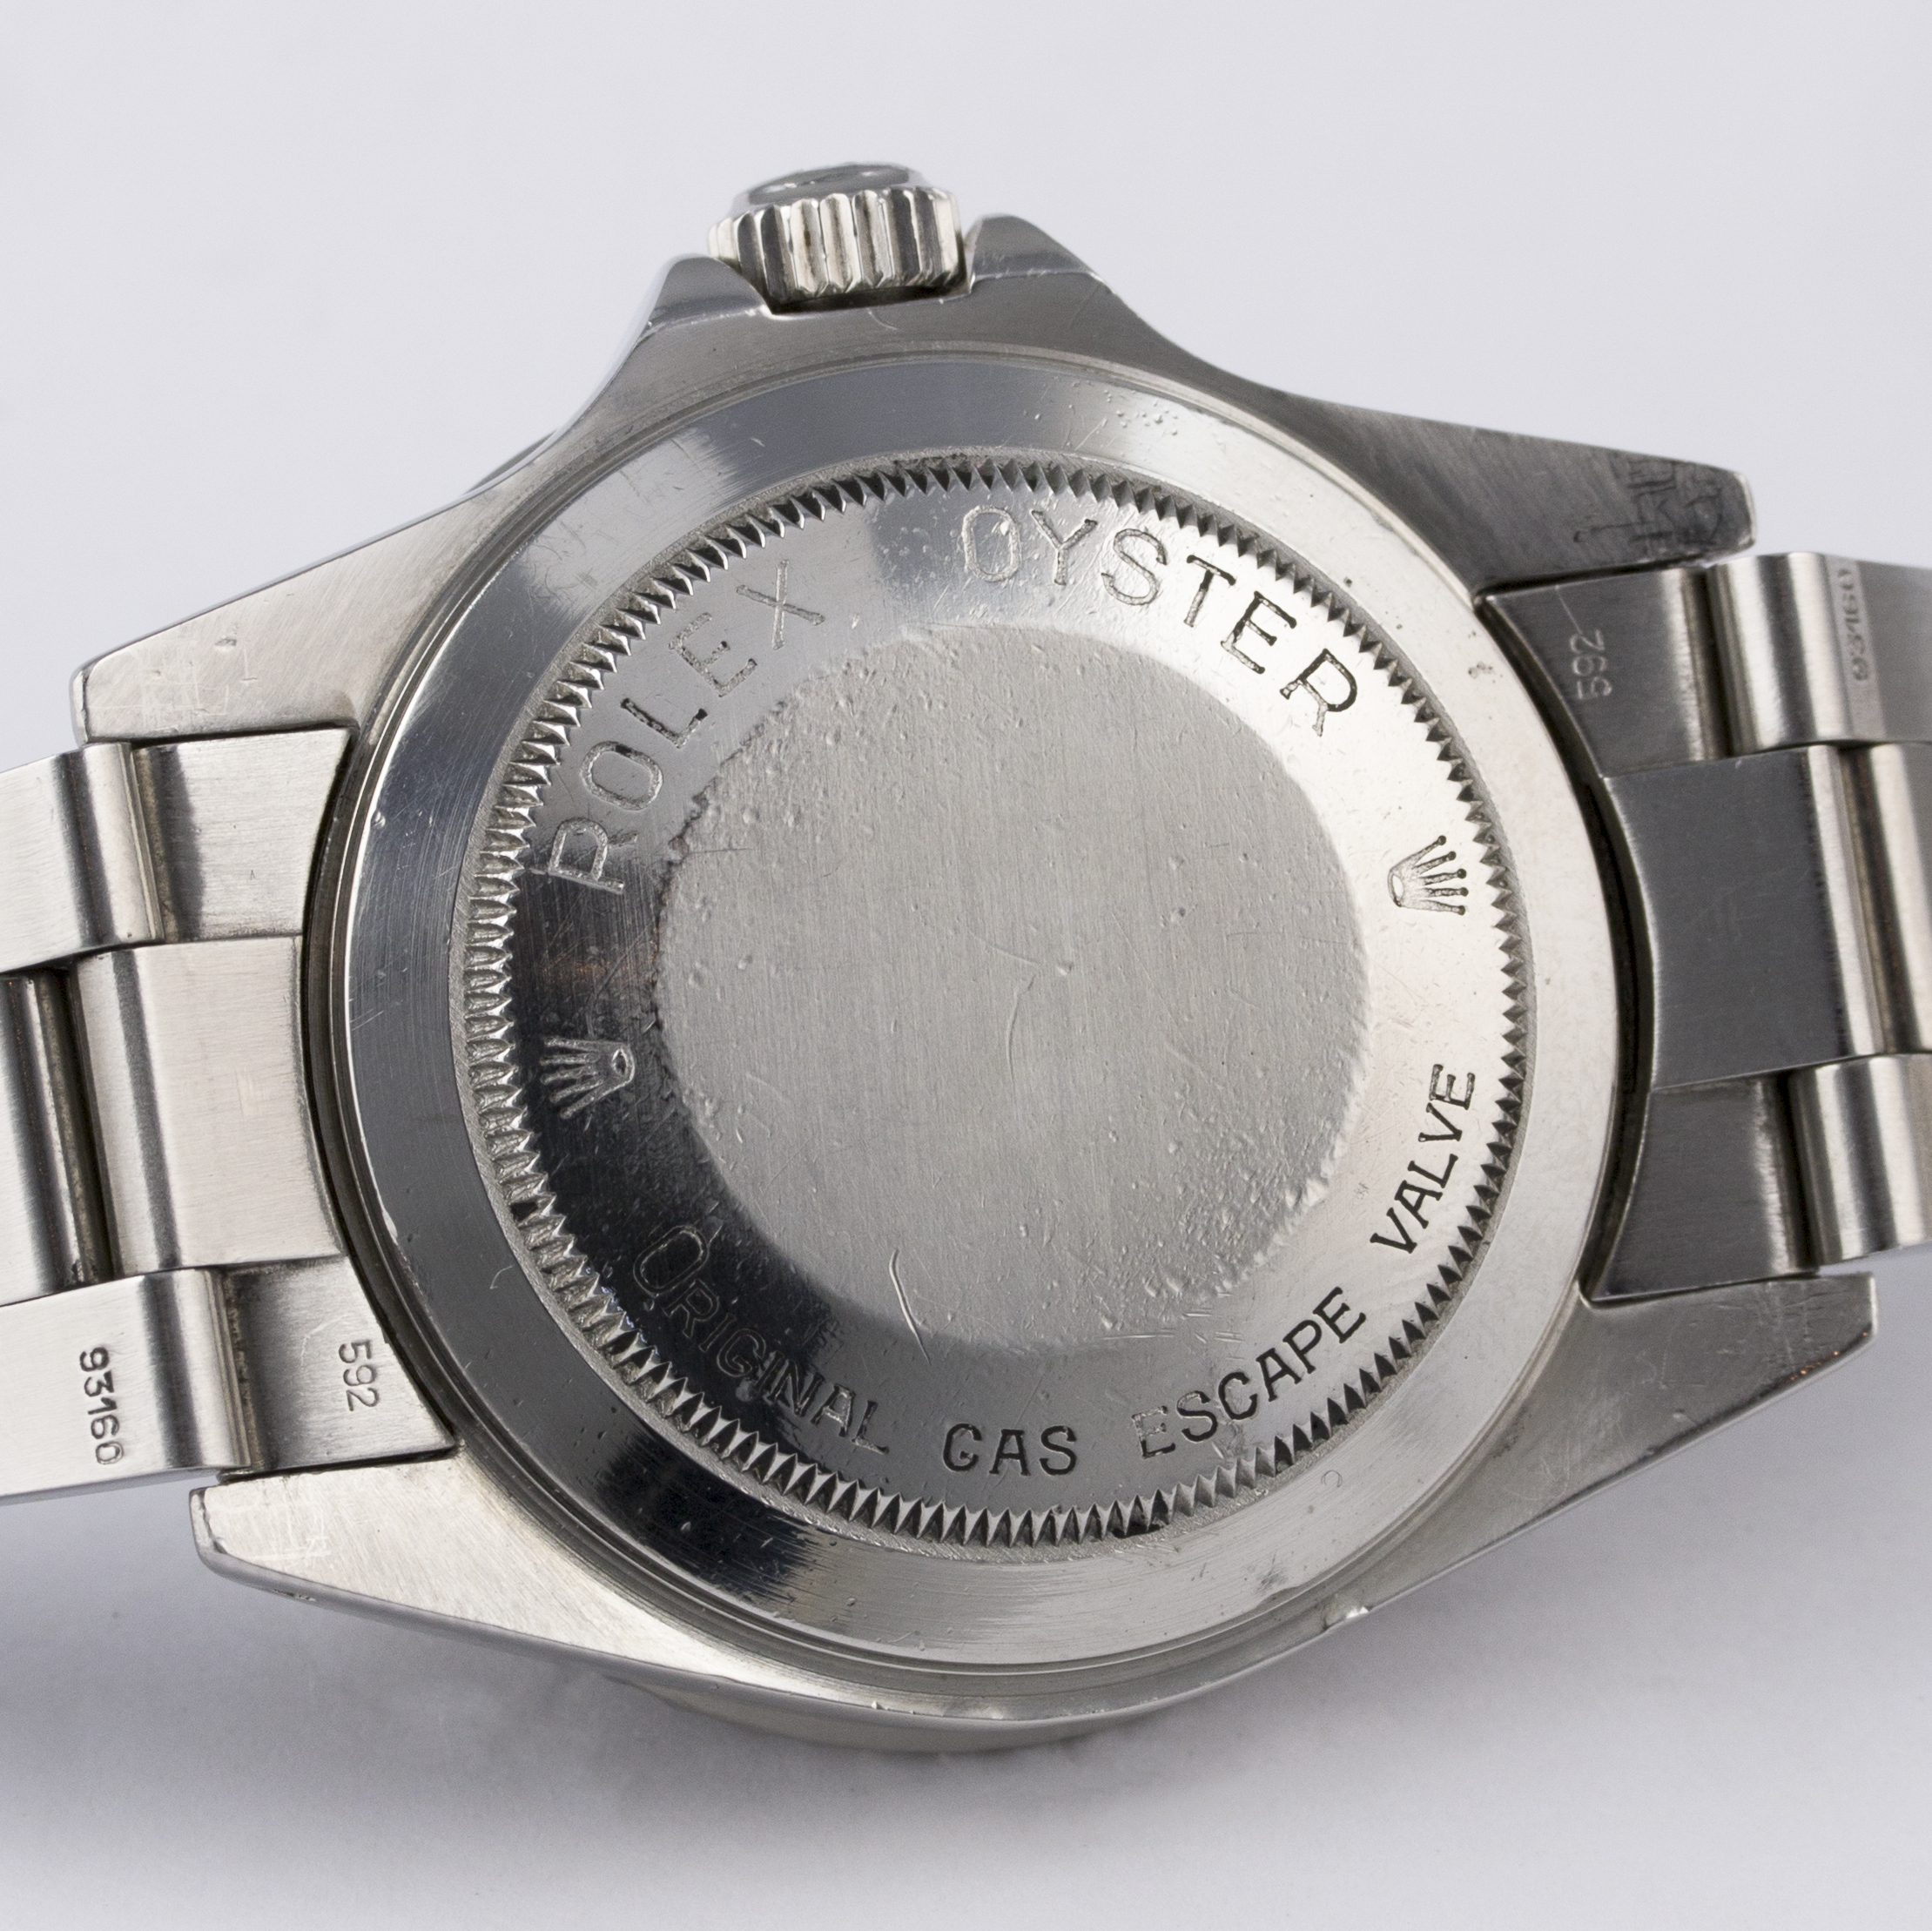 A RARE GENTLEMAN'S STAINLESS STEEL ROLEX OYSTER PERPETUAL DATE SEA DWELLER BRACELET WATCH CIRCA - Image 8 of 8